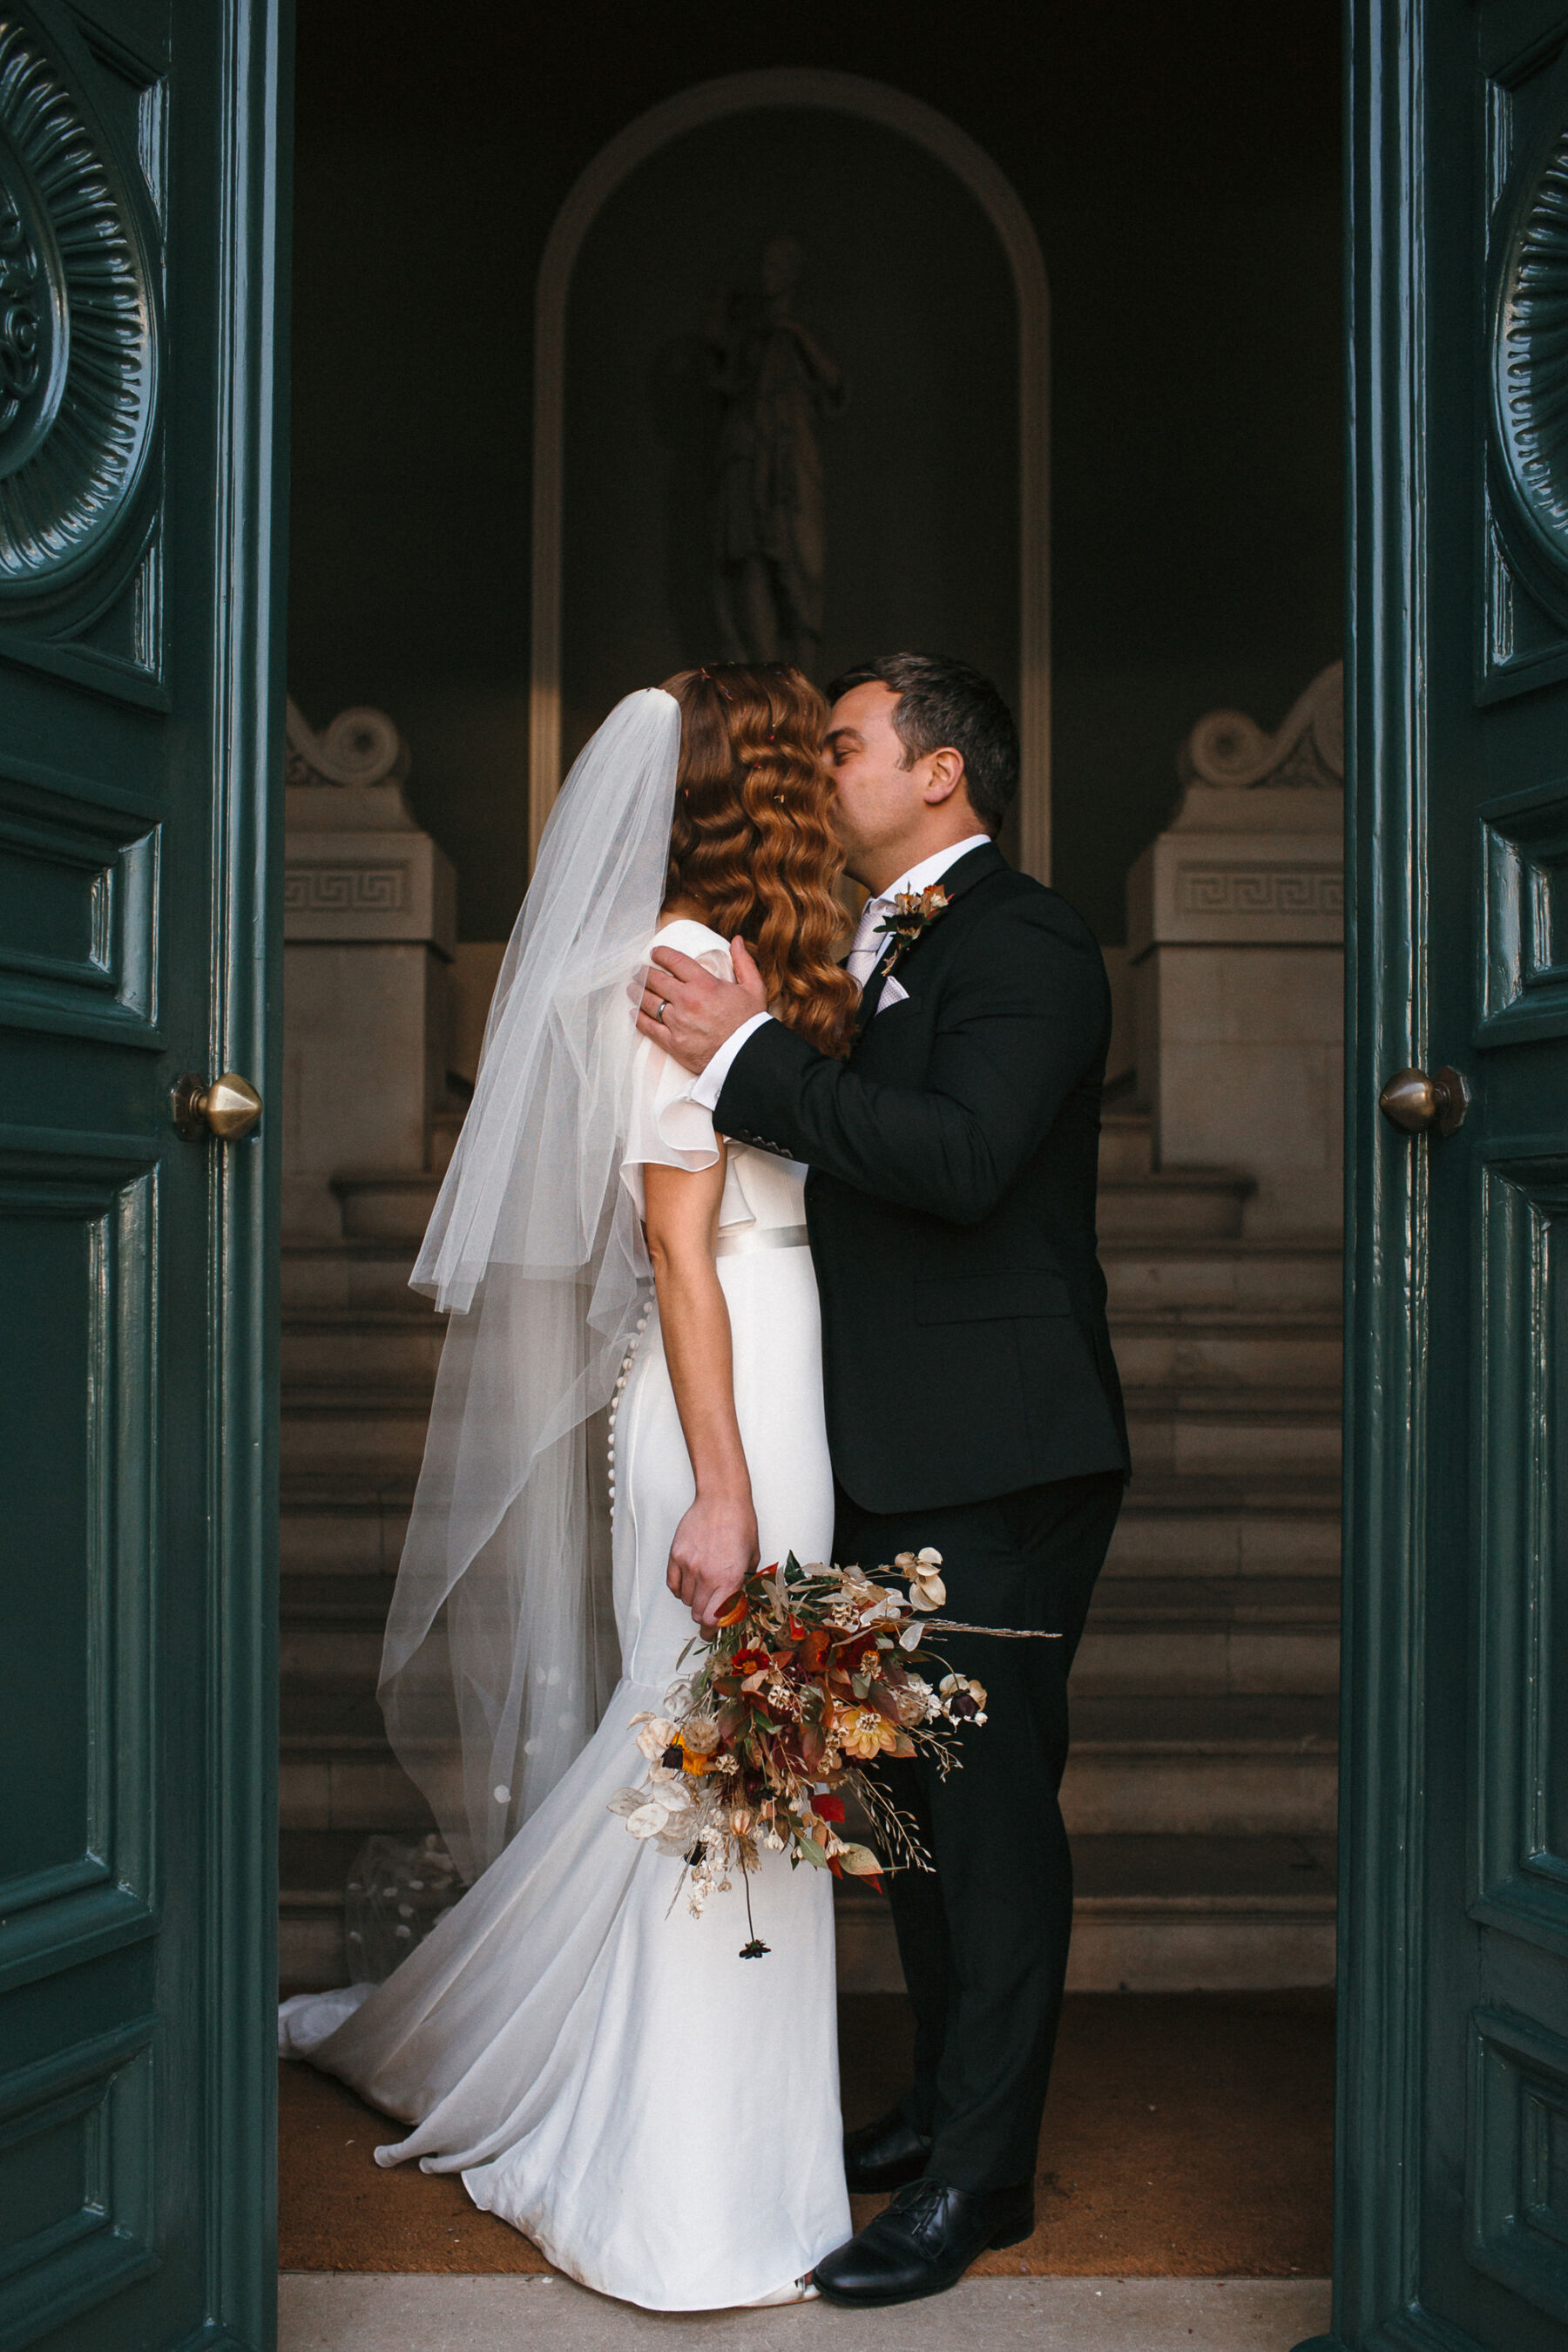 Bride with red wavy hair (marcel waves) wearing a Suzanne Neville dress, carrying an Autumn wedding bouquet & standing in the doorway of Pynes House in Devon being held and kissed by her groom.